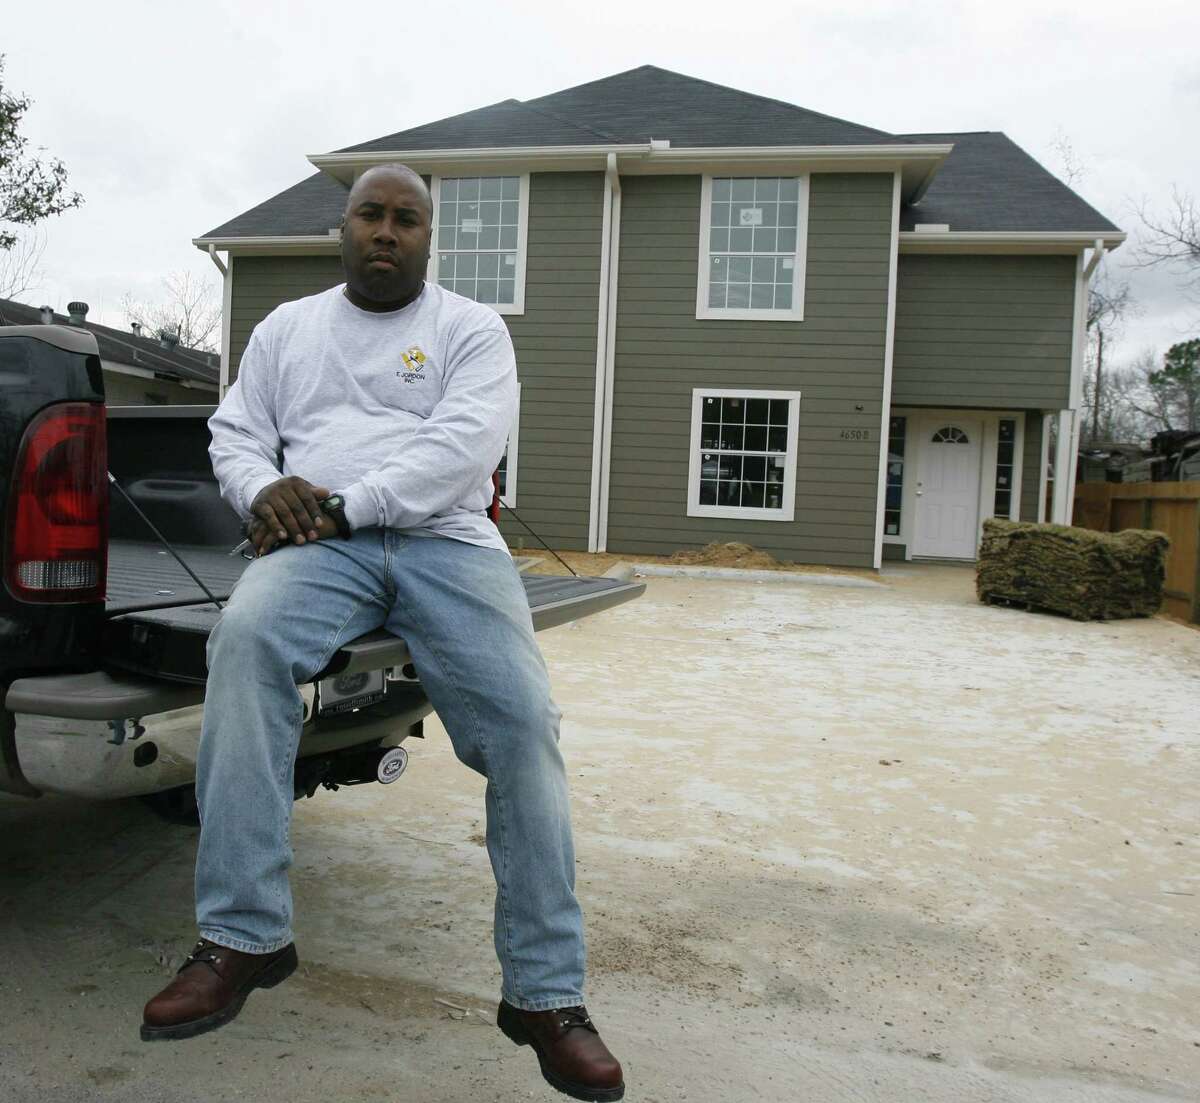 Dwayne Jordon, seen in front of one of his many developments in the Sunnyside neighborhood of Houston in 2007, faces even more legal problems.